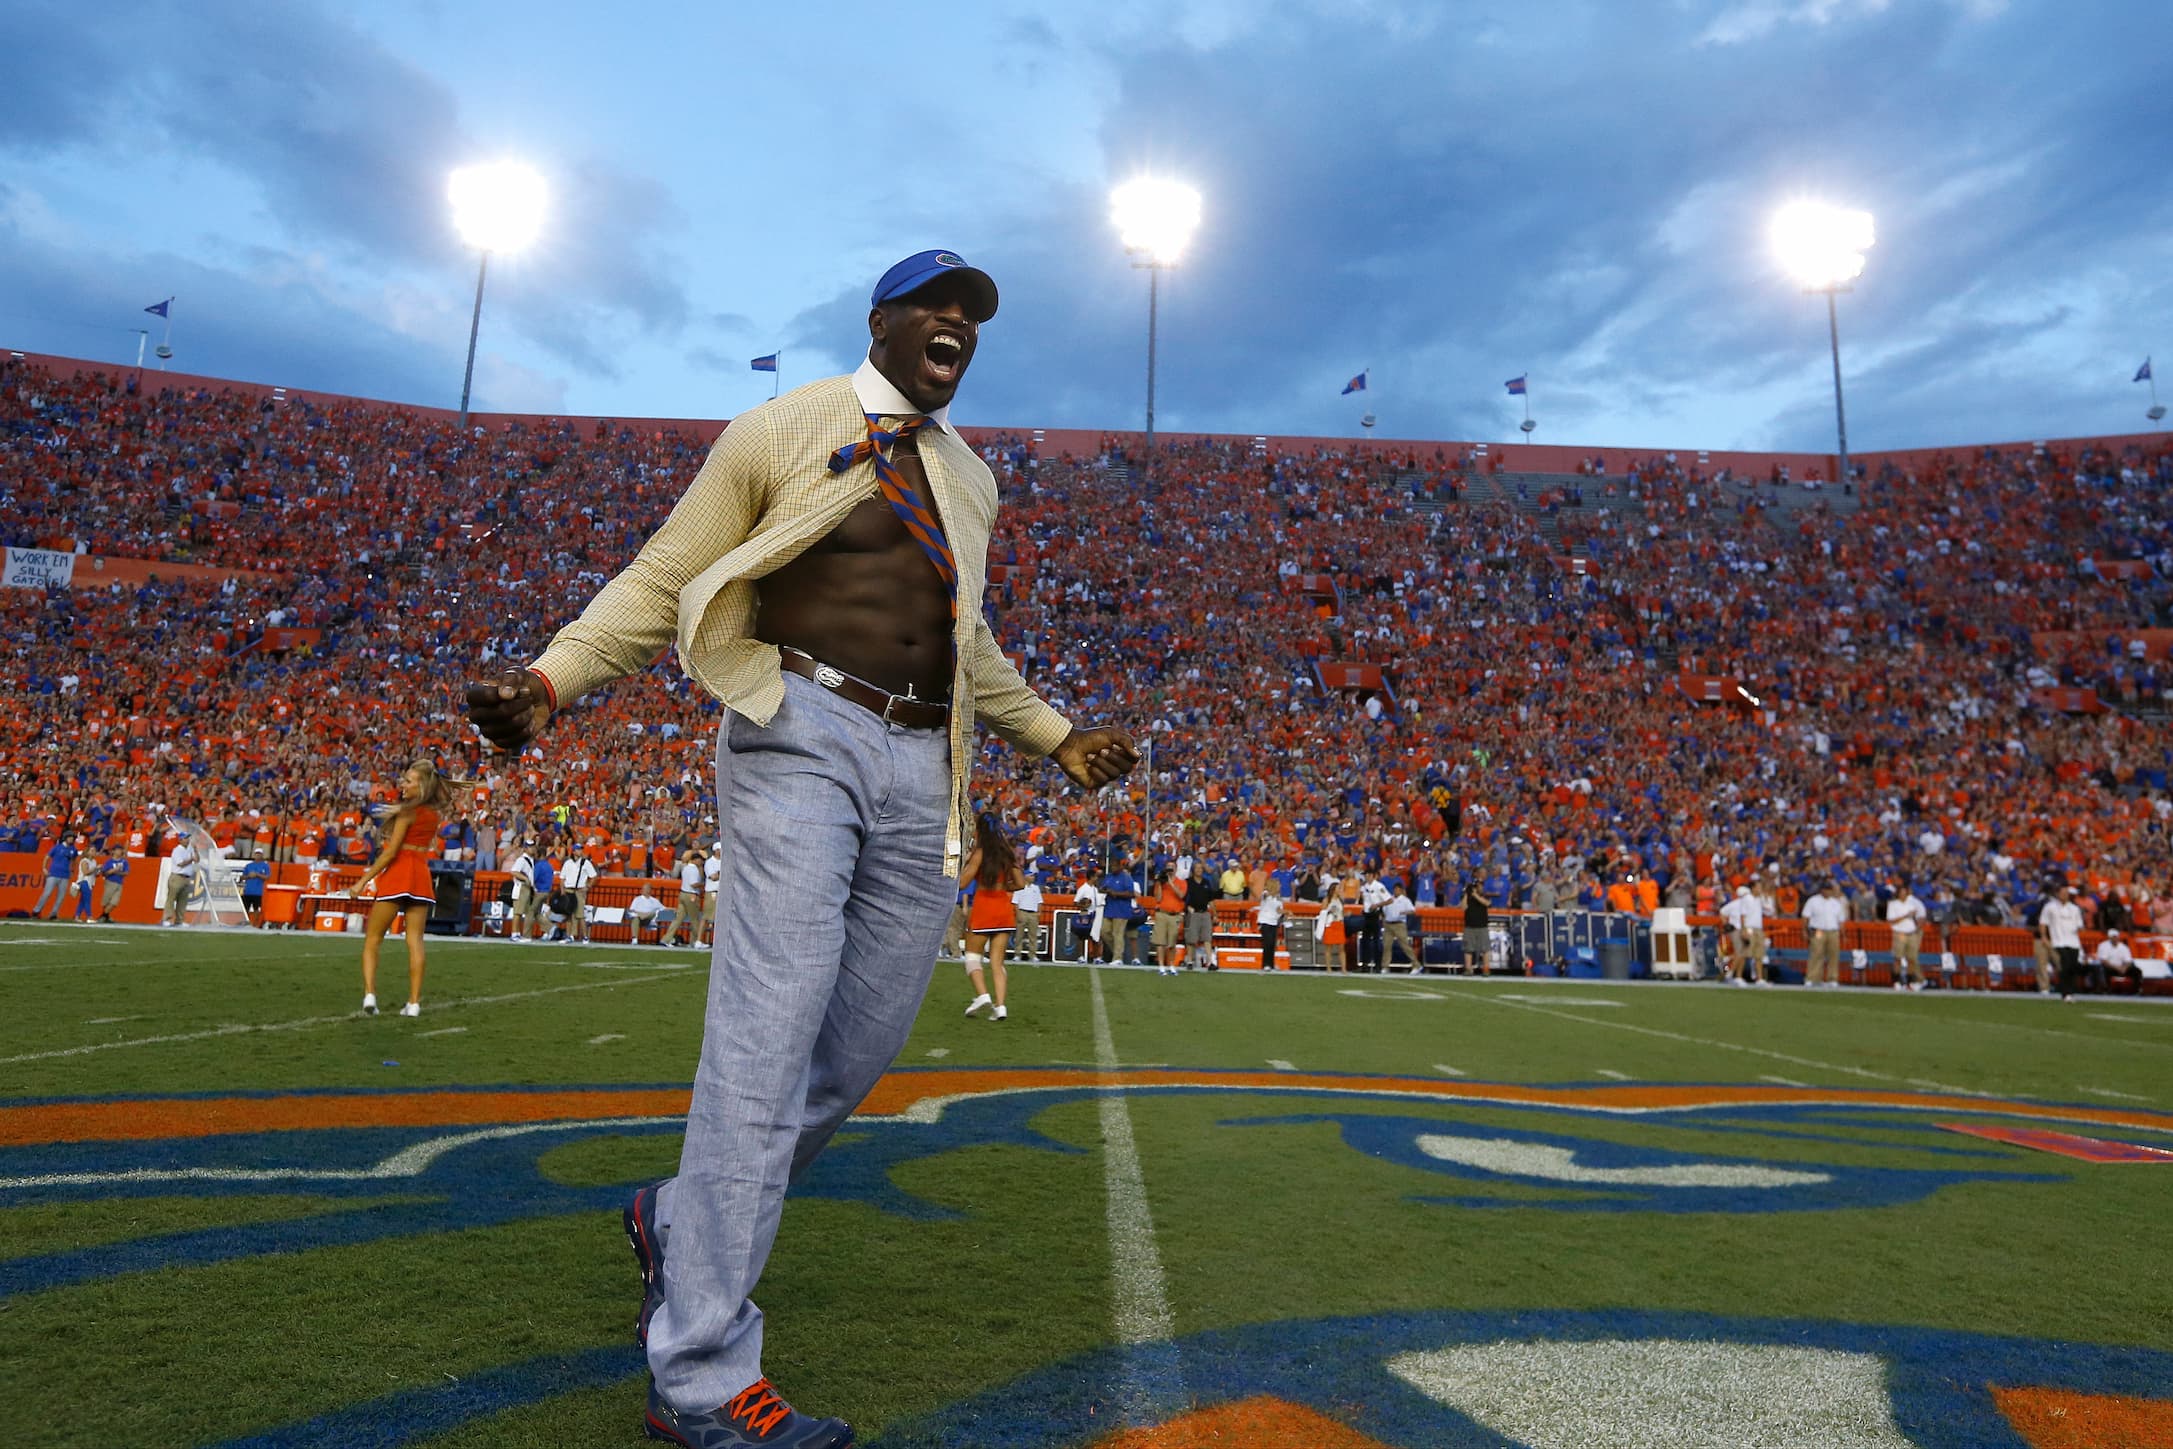 Titus O'Neil wears the signature yellow button up and seersucker pants of UF's Mr. Two-bits while running onto the UF football field